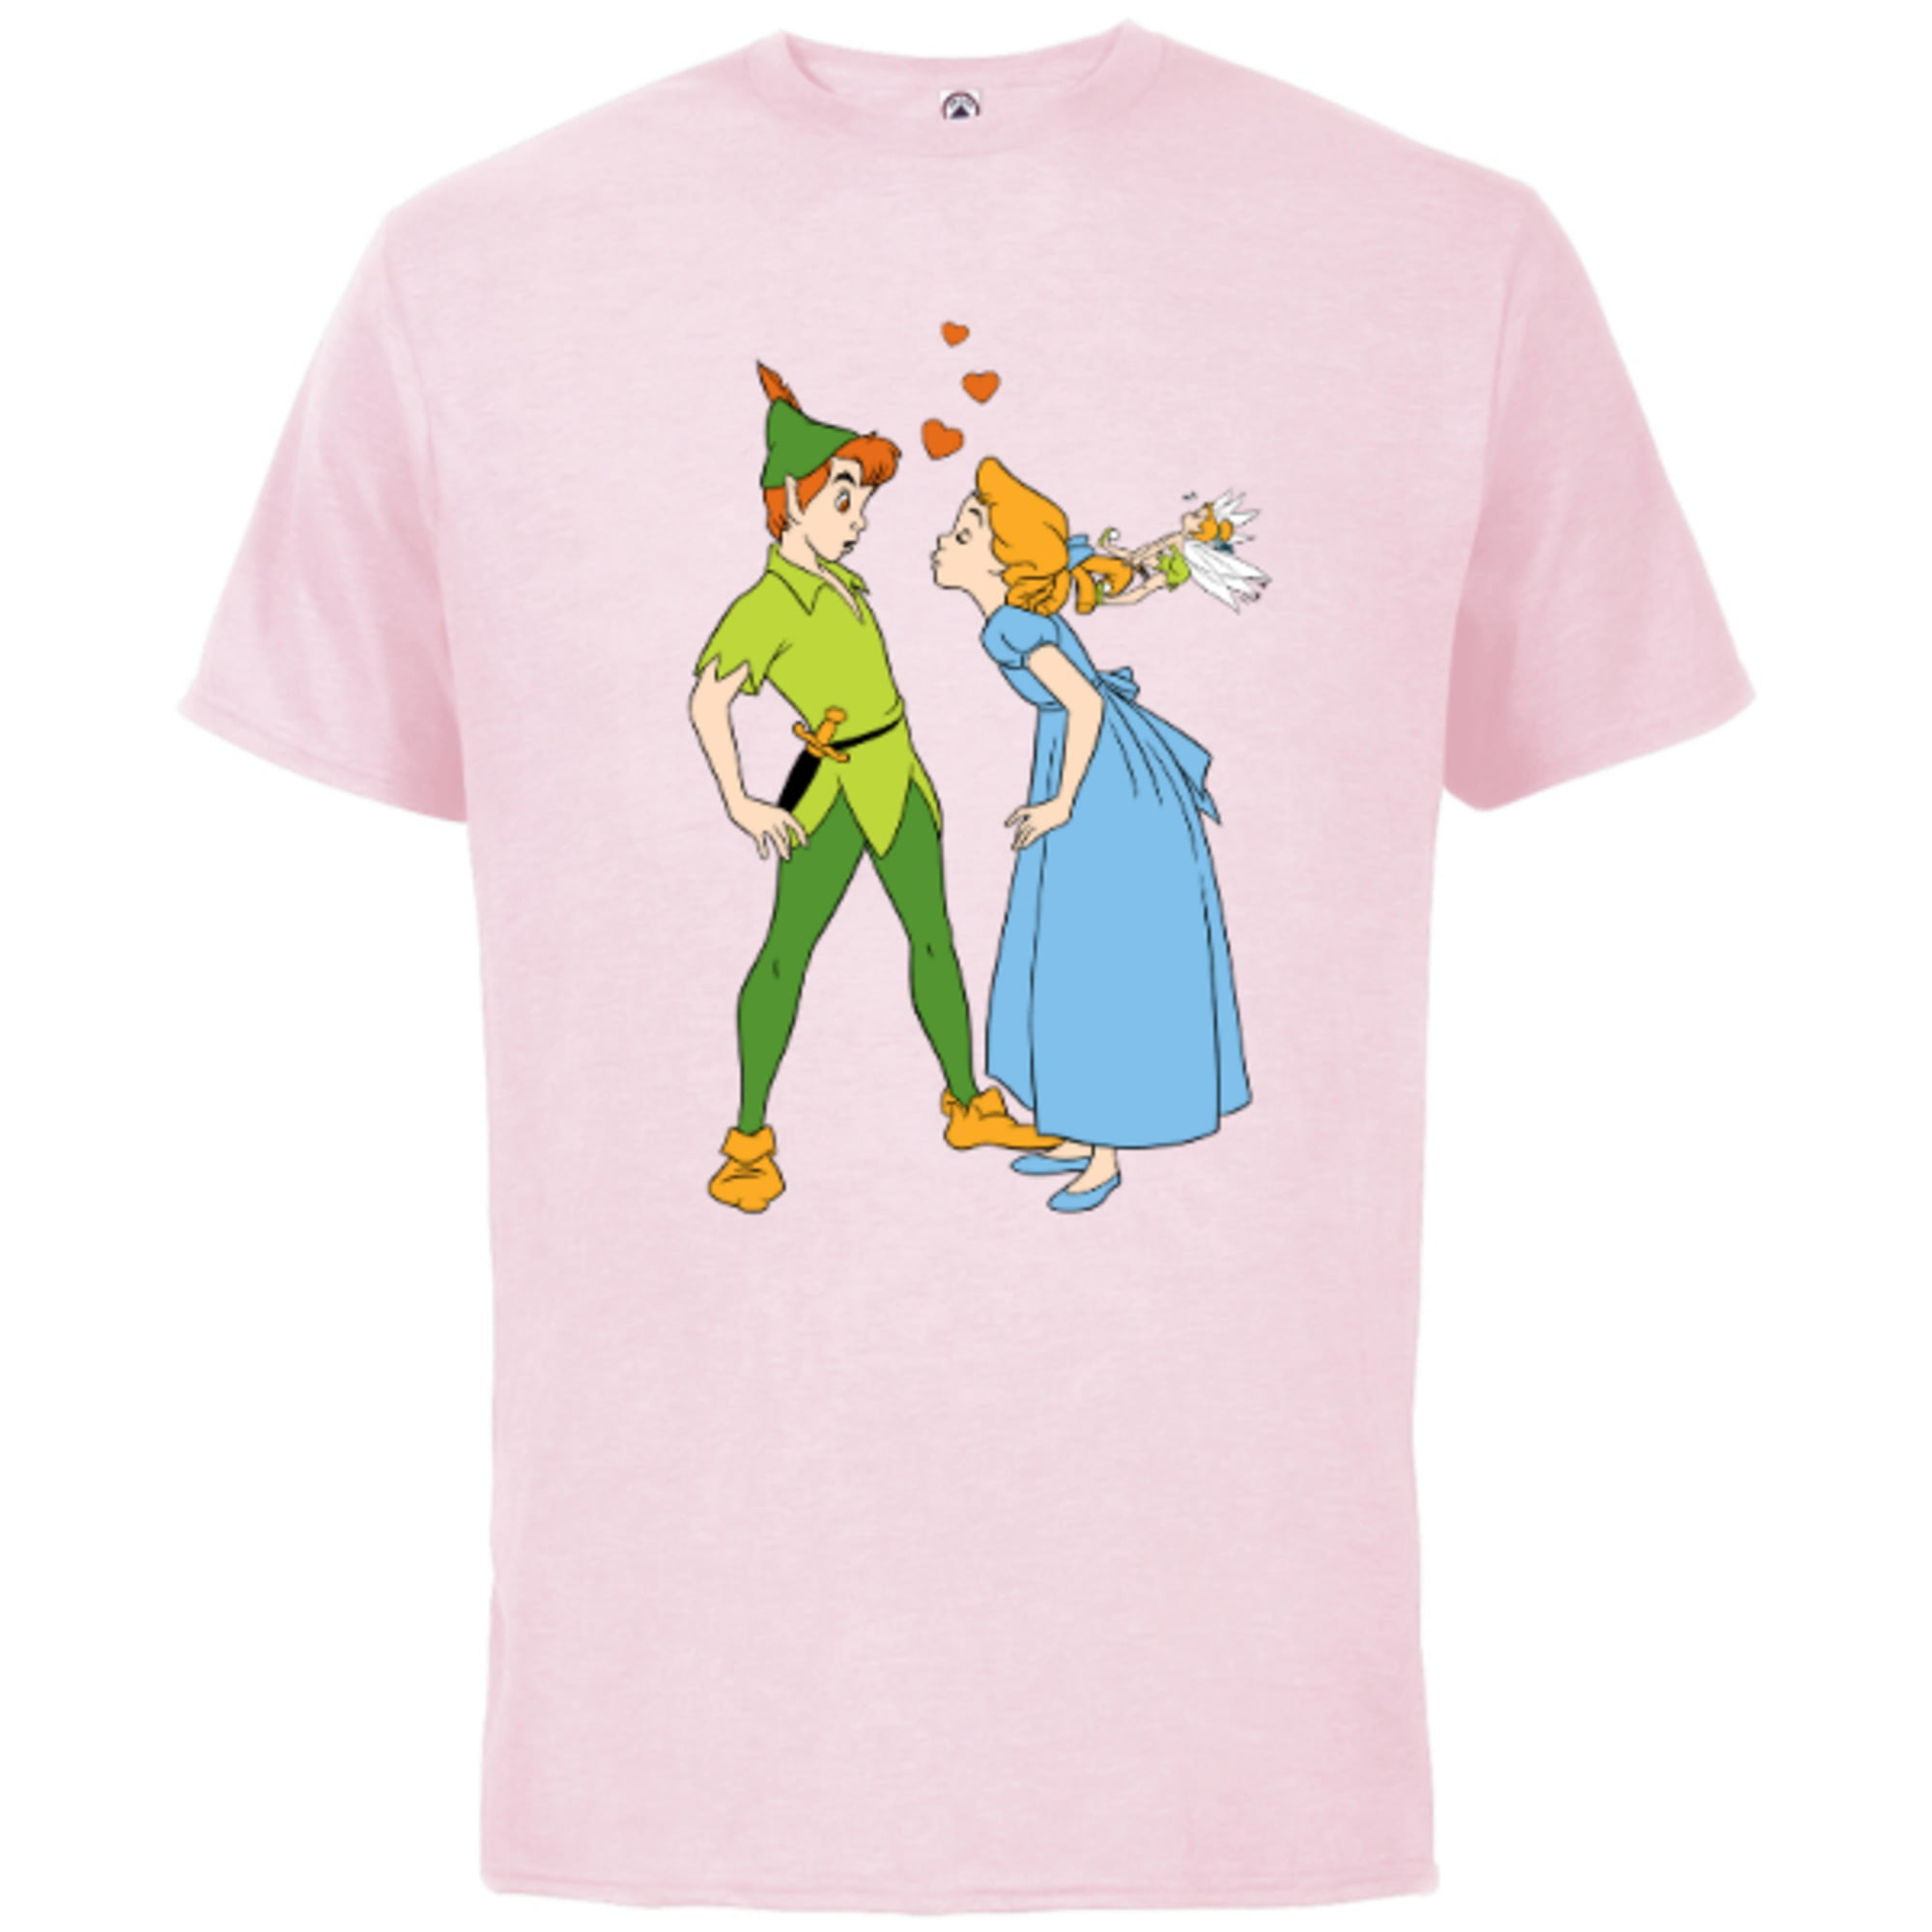 Disney Peter Pan and Wendy Darling Kiss Valentine's Day - Short Sleeve  Cotton T-Shirt for Adults - Customized-Soft Pink